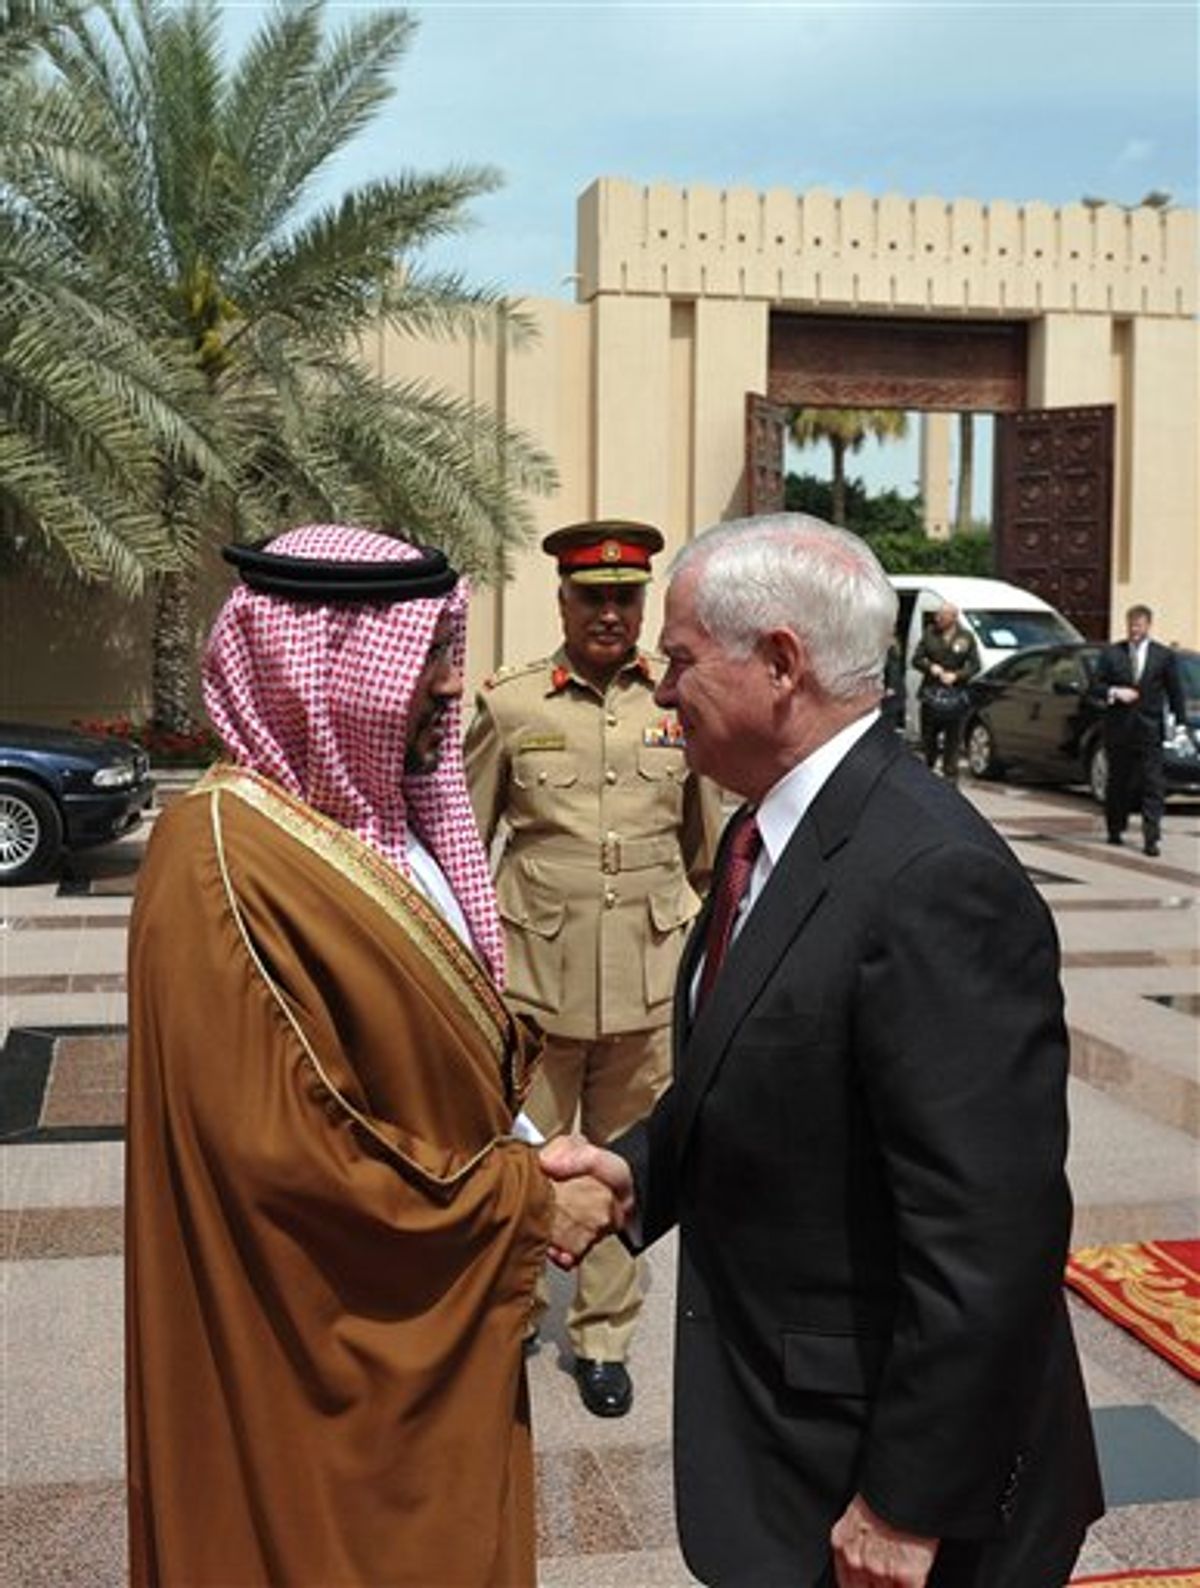 U.S. Defense Secretary Robert Gates, right, is greeted by Bahrain's Crown Prince Salman bin Hamad al-Khalifa as he arrives for a meeting at Al-Zahar Palace in Manama Saturday, March 12, 2011. Gates is meeting in Bahrain with the kingdom's top rulers, who are facing growing demands for more political freedom.  (AP Photo/ Mandal Ngan, pool) (AP)